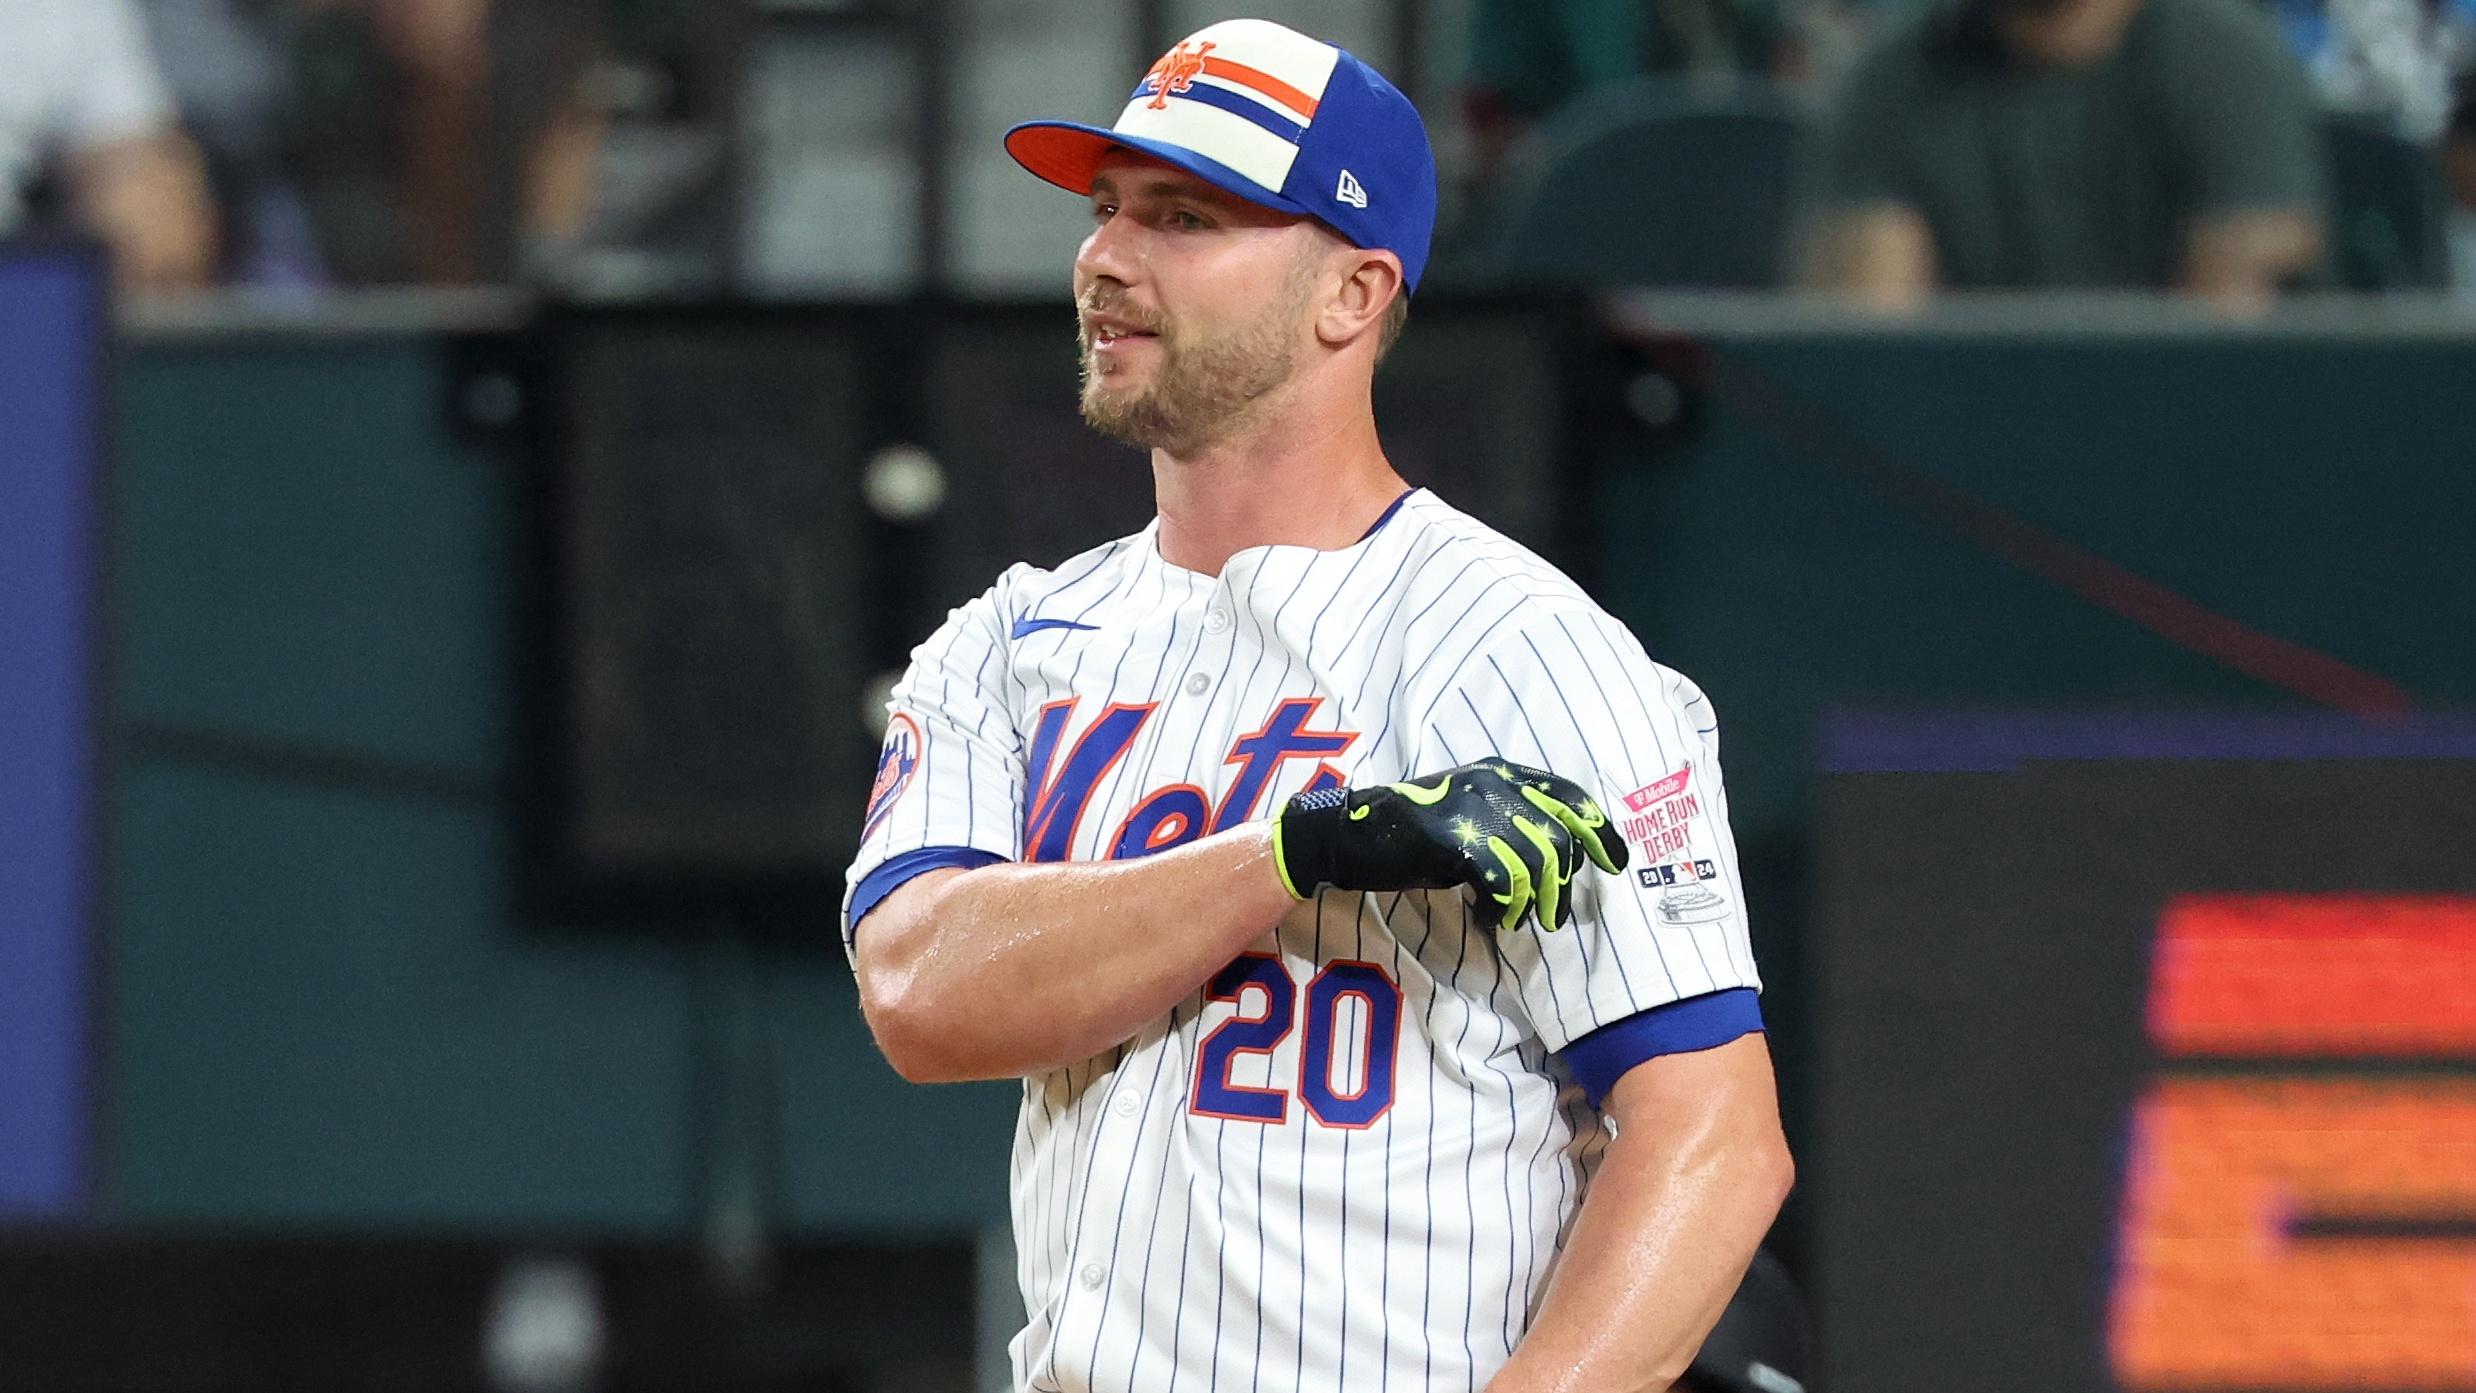 National League first baseman Pete Alonso of the New York Mets (20) reacts during the 2024 Home Run Derby at Globe Life Field